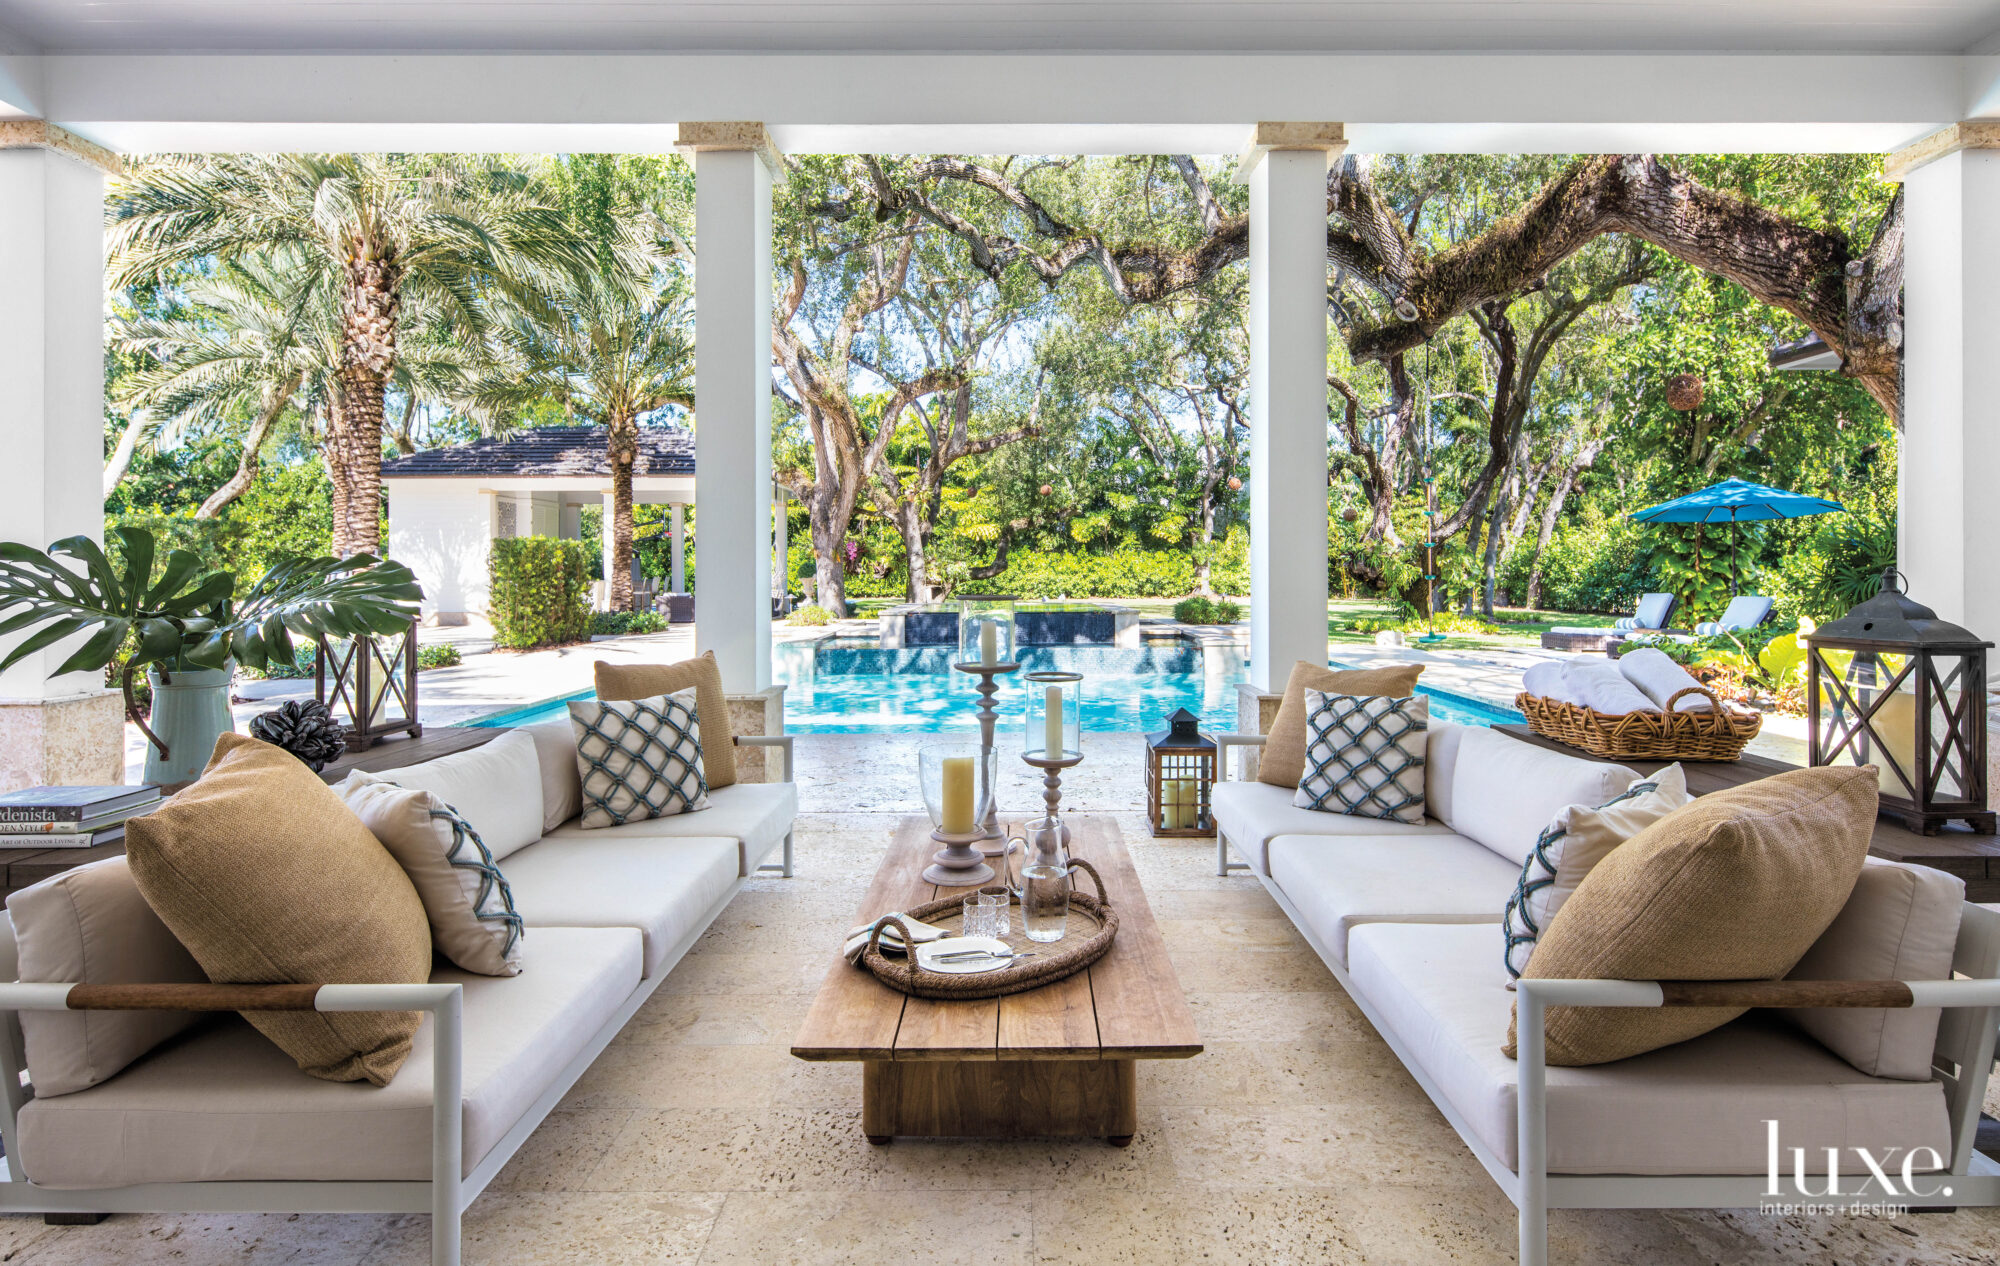 Loggia with views of the pool